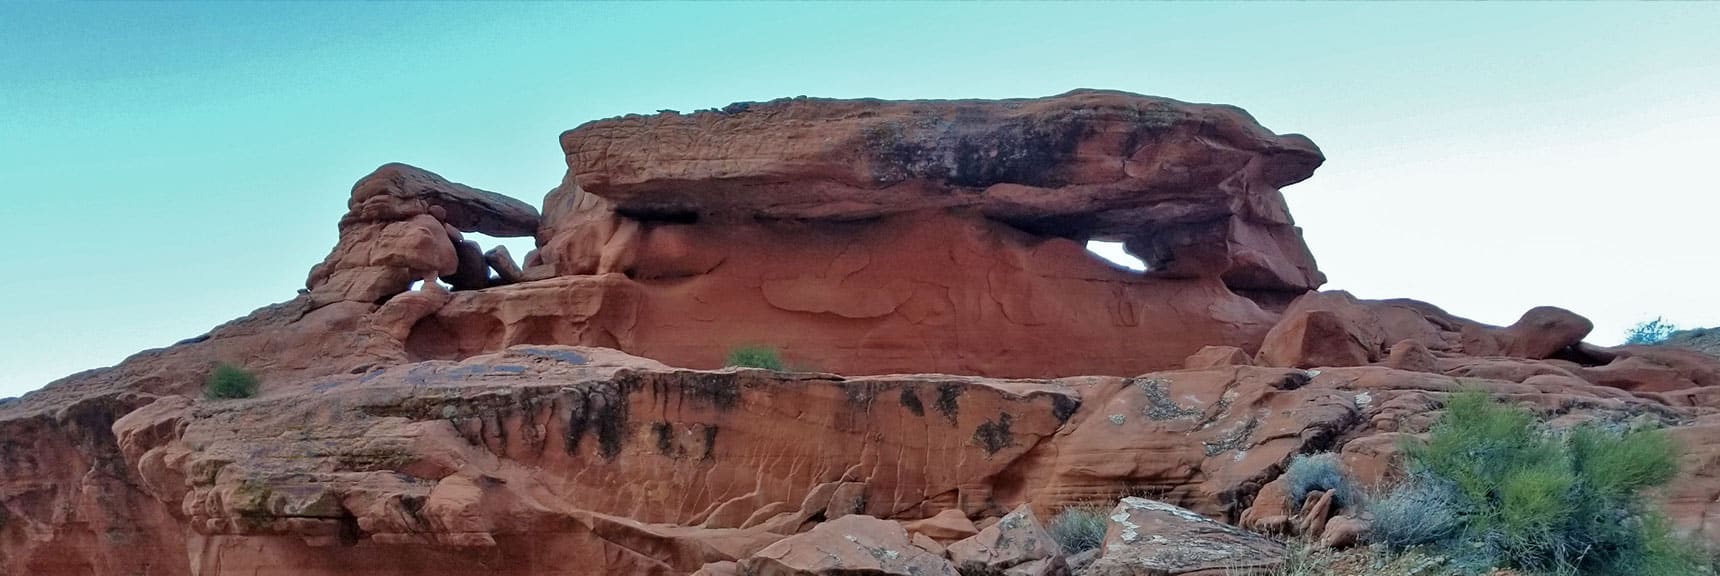 Bizarre Rock Formations in the Northern Canyon Wash on Prospect Trail in Valley of Fire State Park, Nevada